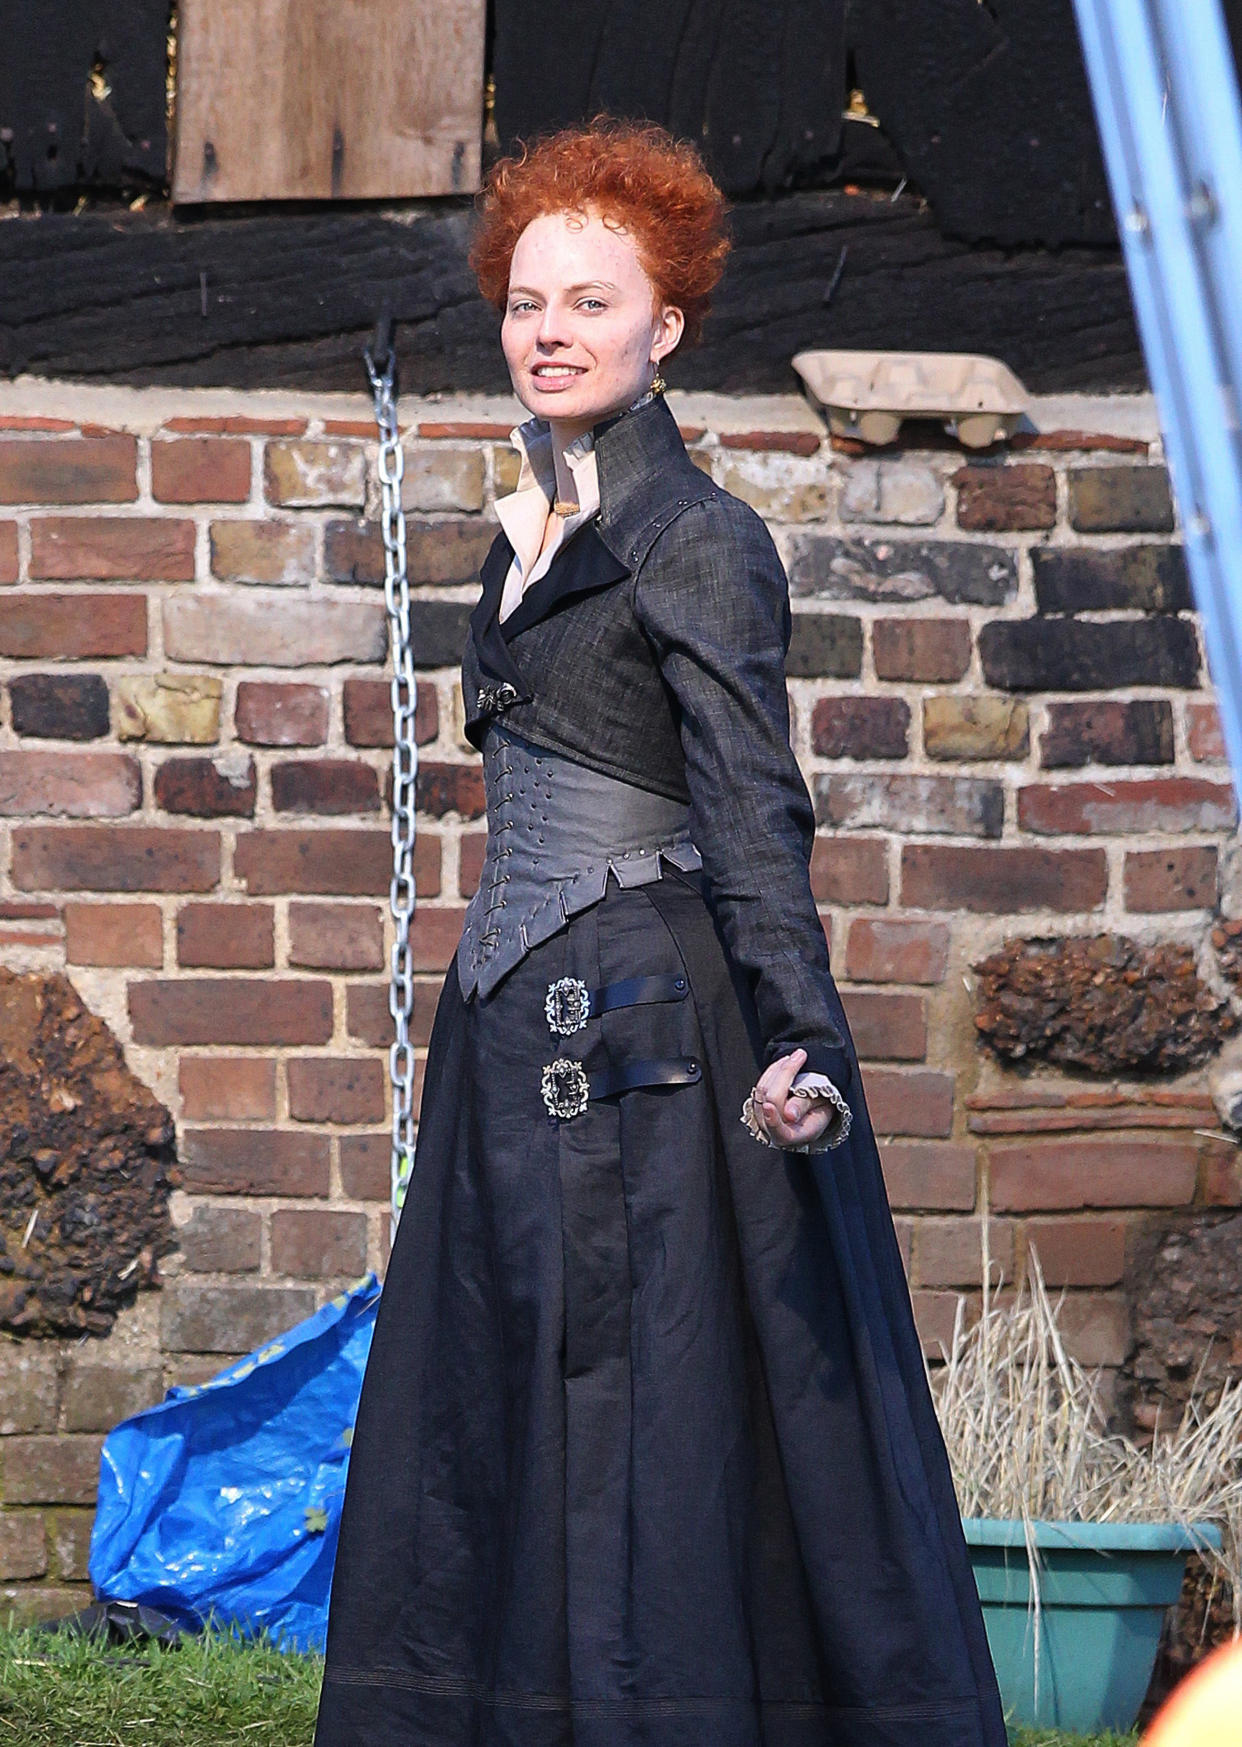 EXCLUSIVE: ***PREMIUM EXCLUSIVE RATES APPLY*** Margot Robbie looks completely unrecognisable as she transforms into Queen Elizabeth I for new film Mary Queen of Scots. The Australian star, 27, was the spitting image of The Virgin Queen as she donned traditional Tudor garb including a corset, jacket and wide buckled skirt to get into character for her new role.<P>Pictured: Margot Robbie<B>Ref: SPL1558320  210817   EXCLUSIVE</B><BR/>Picture by: Flynet - Splash News<BR/></P><P><B>Splash News and Pictures</B><BR/>Los Angeles:310-821-2666<BR/>New York:212-619-2666<BR/>London:870-934-2666<BR/>photodesk@splashnews.com<BR/></P>